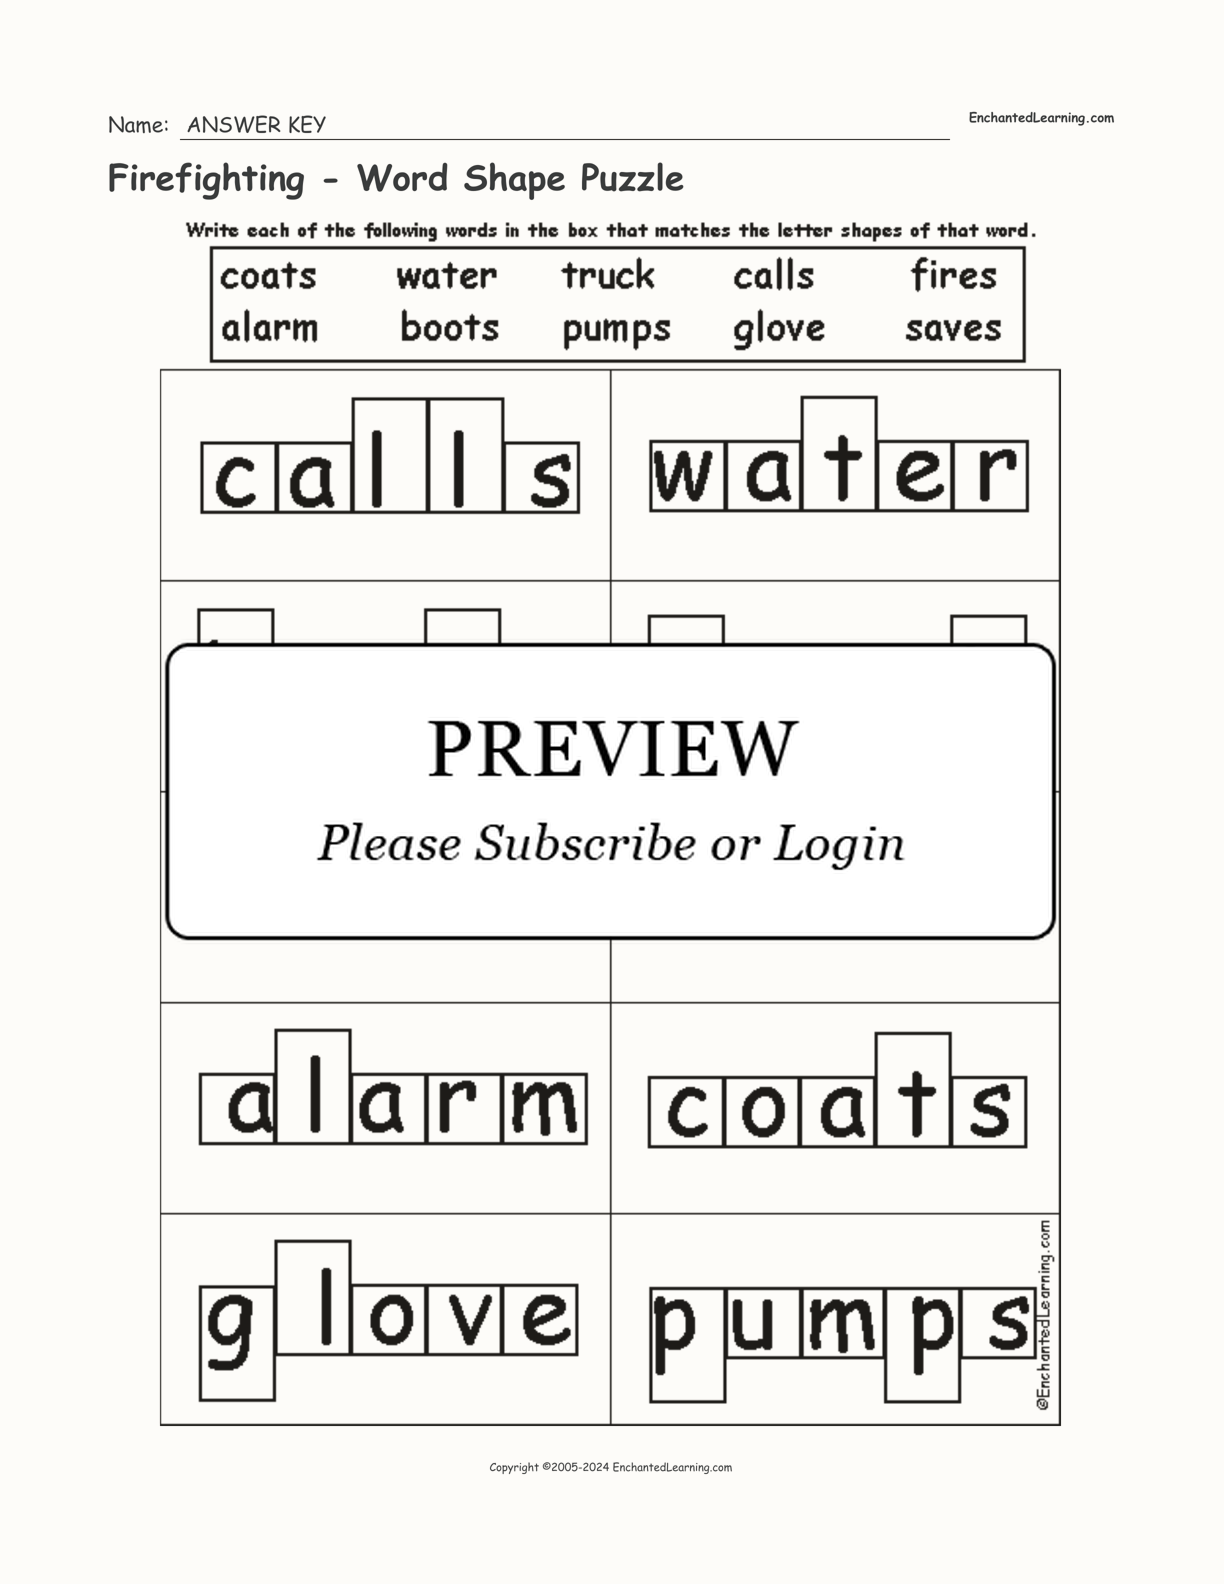 Firefighting - Word Shape Puzzle interactive worksheet page 2